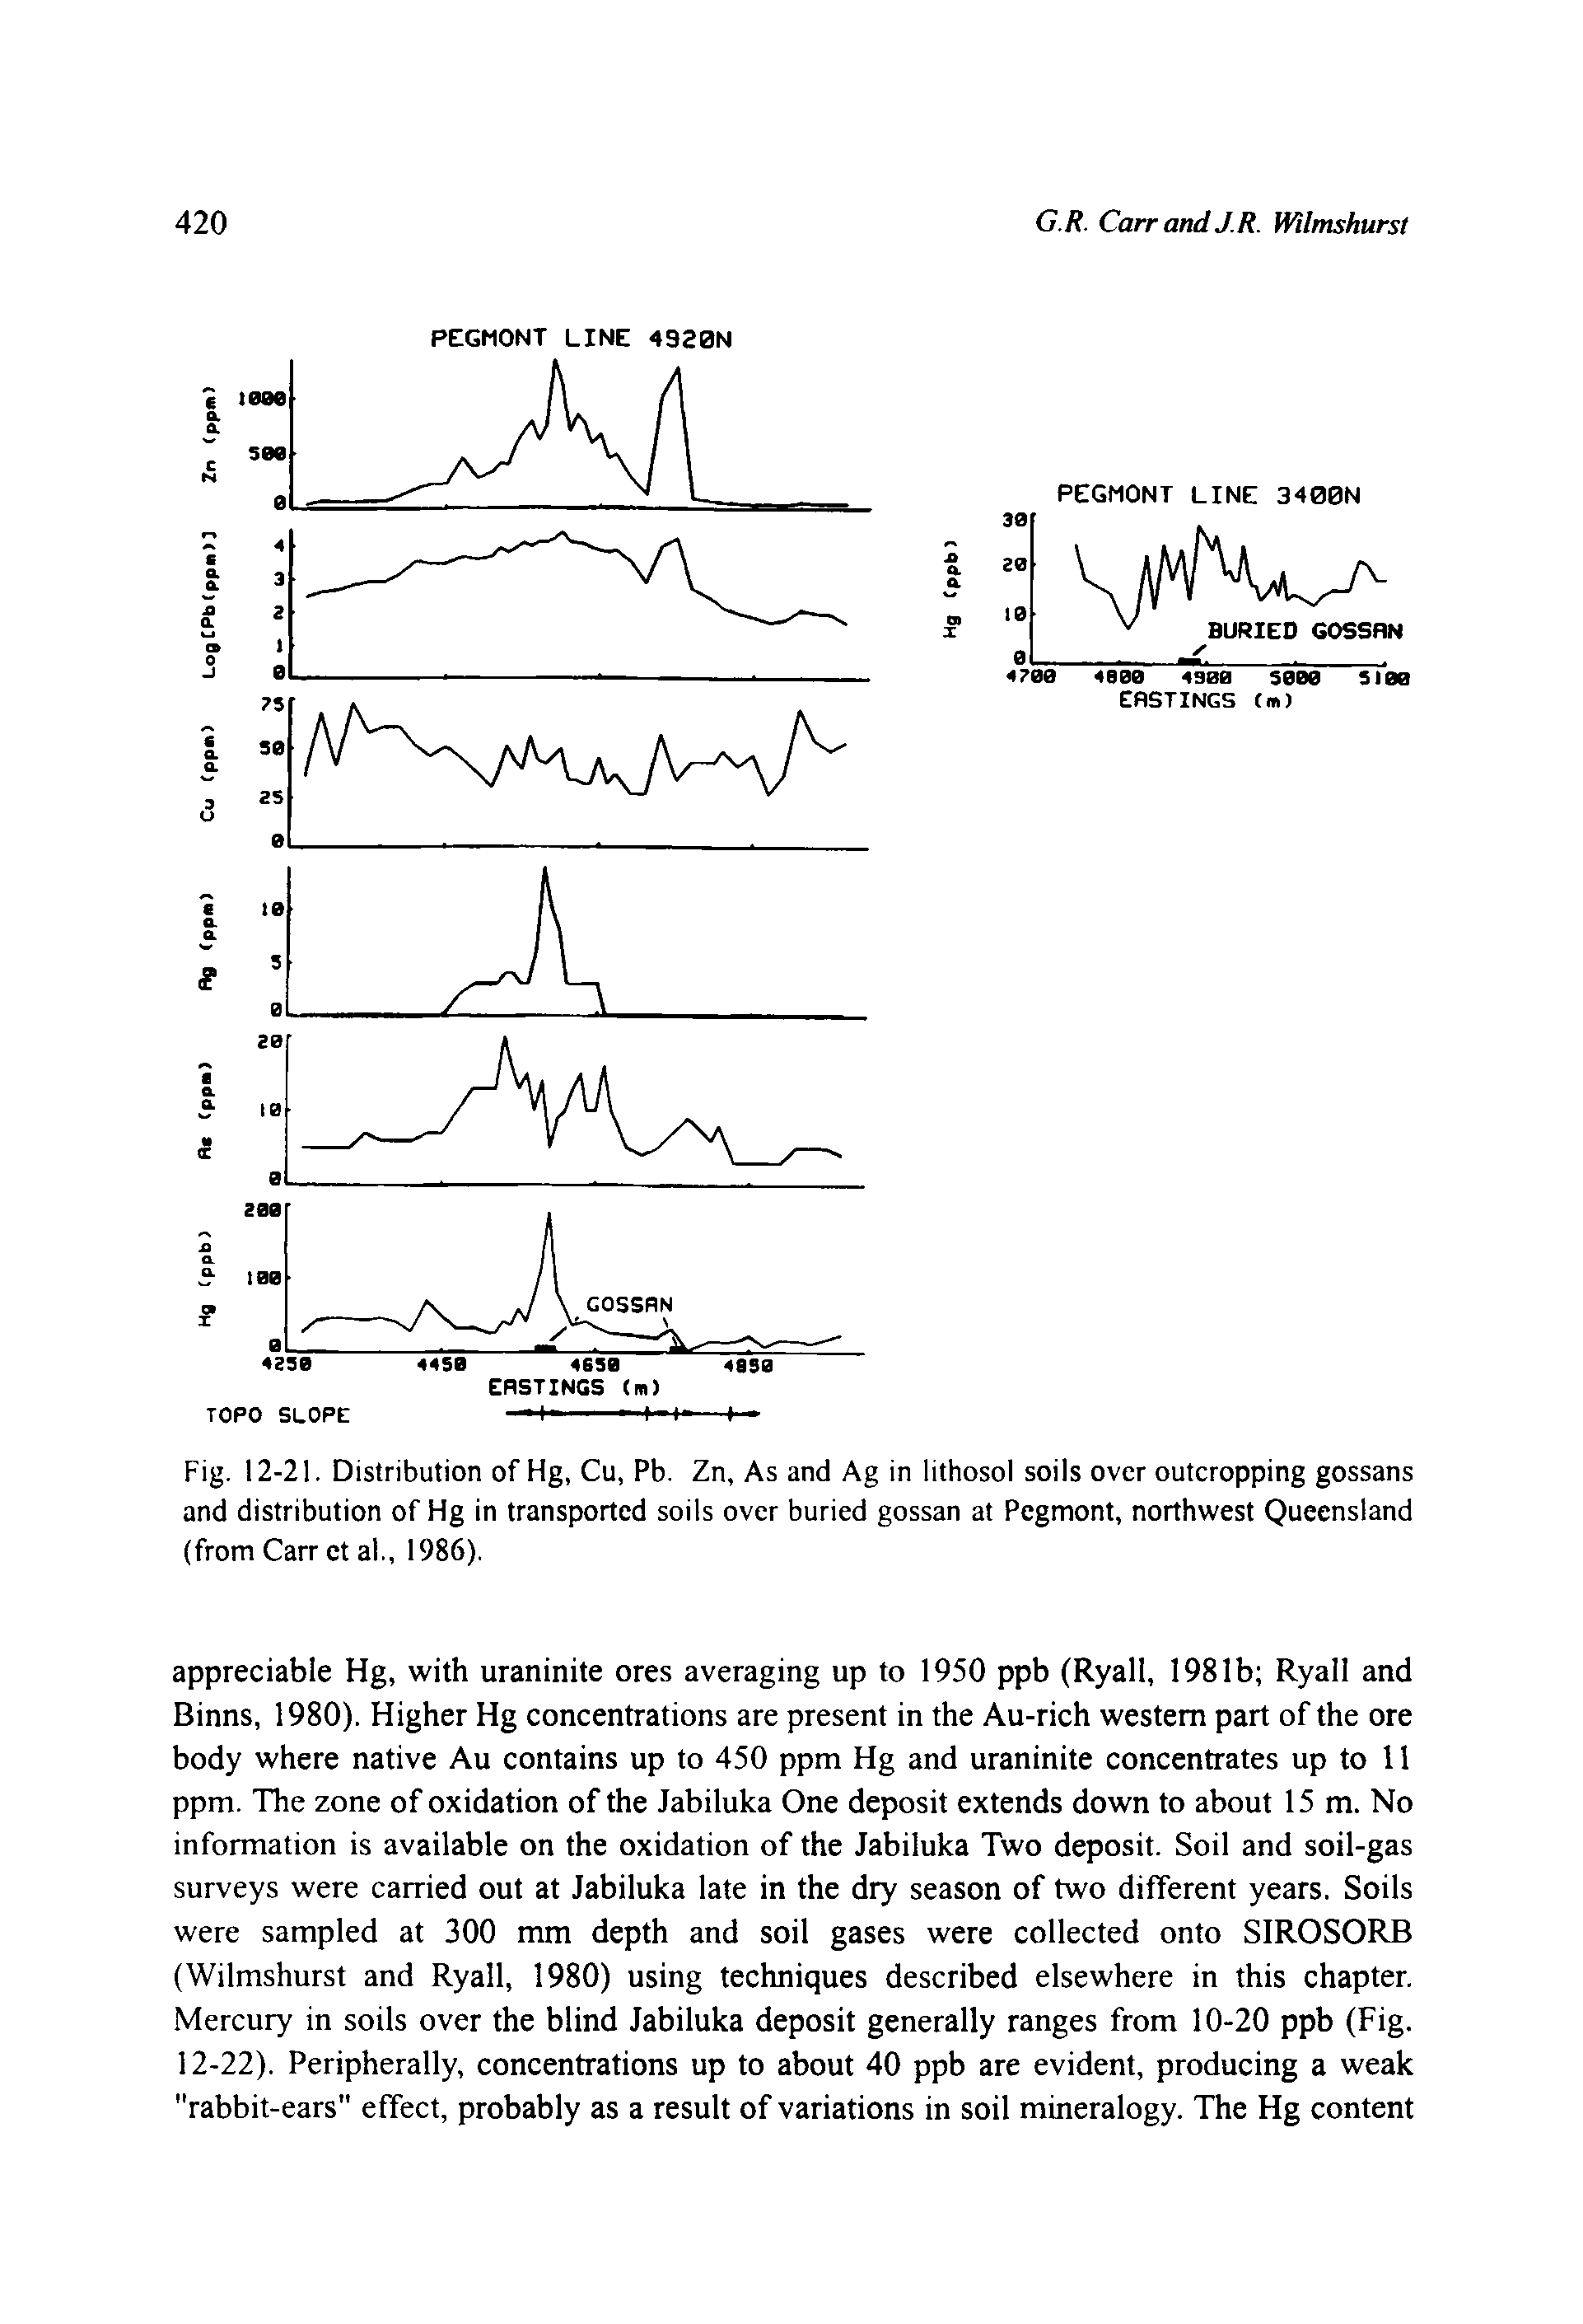 Fig. 12-21. Distribution of Hg, Cu, Pb. Zn, As and Ag in lithosol soils over outcropping gossans and distribution of Hg in transported soils over buried gossan at Pegmont, northwest Queensland (from Carr ct al., 1986).